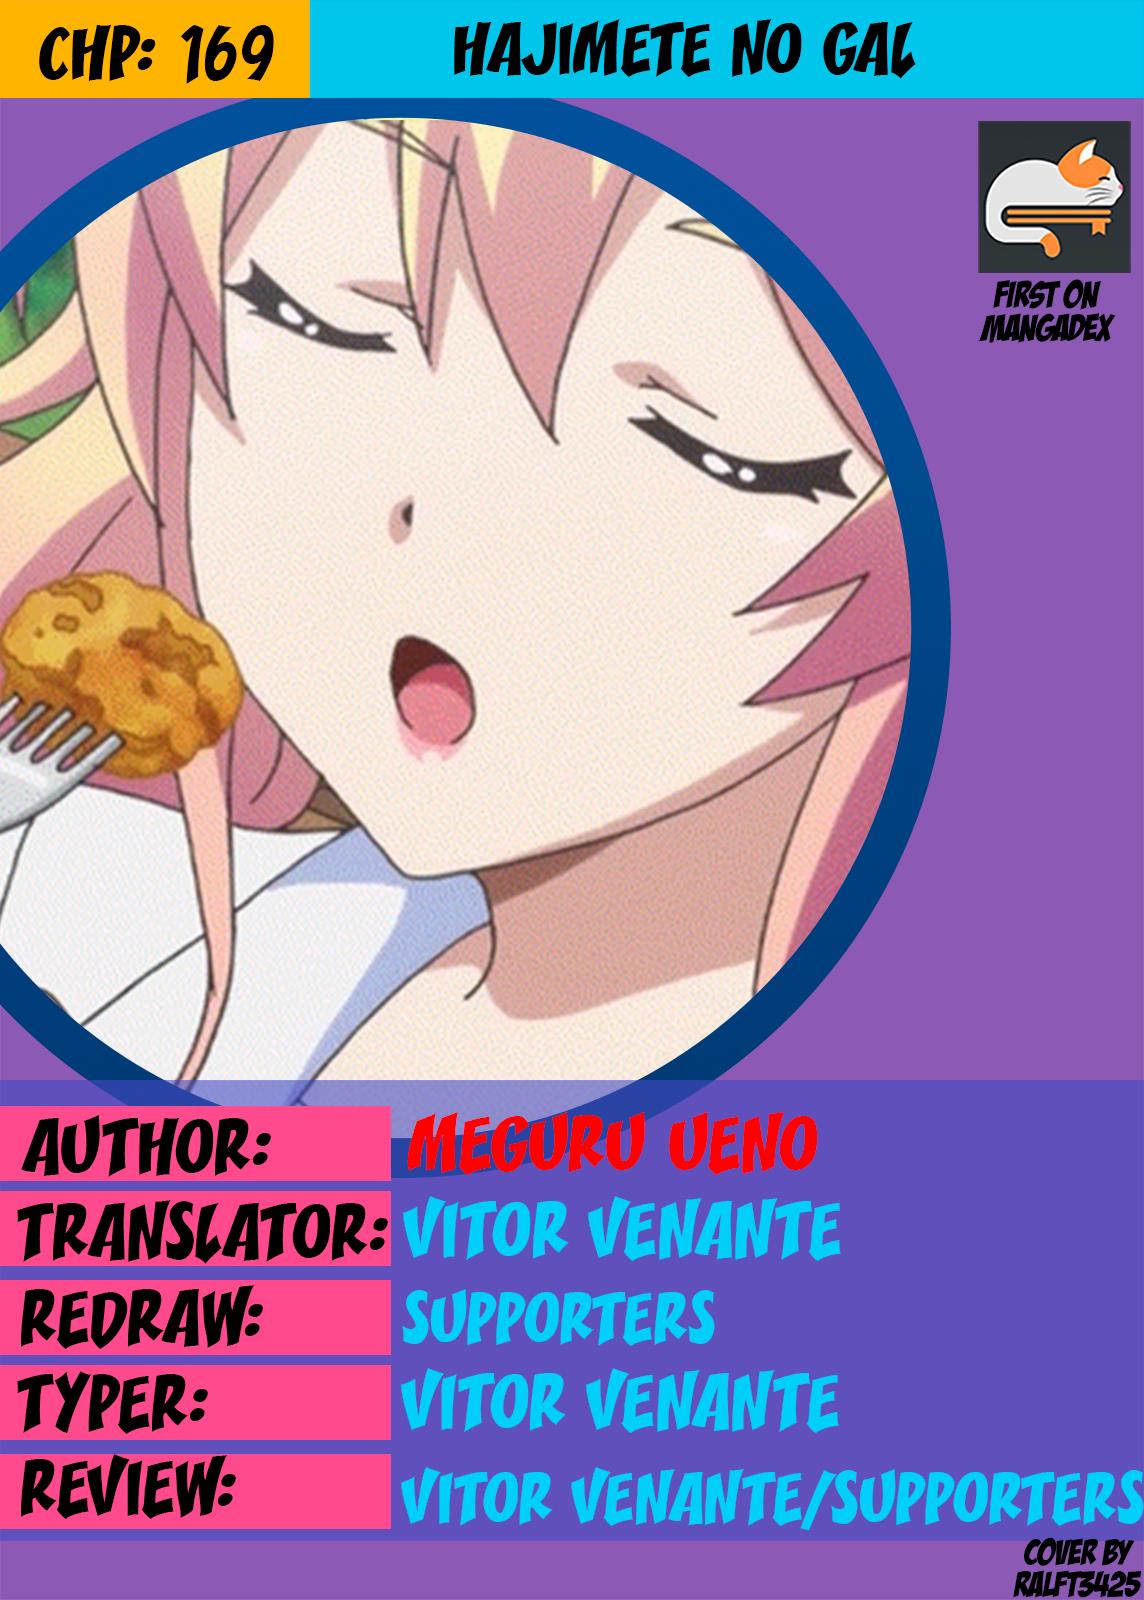 Hajimete No Gal Vol.17 Chapter 169: My First Feedback - Picture 1